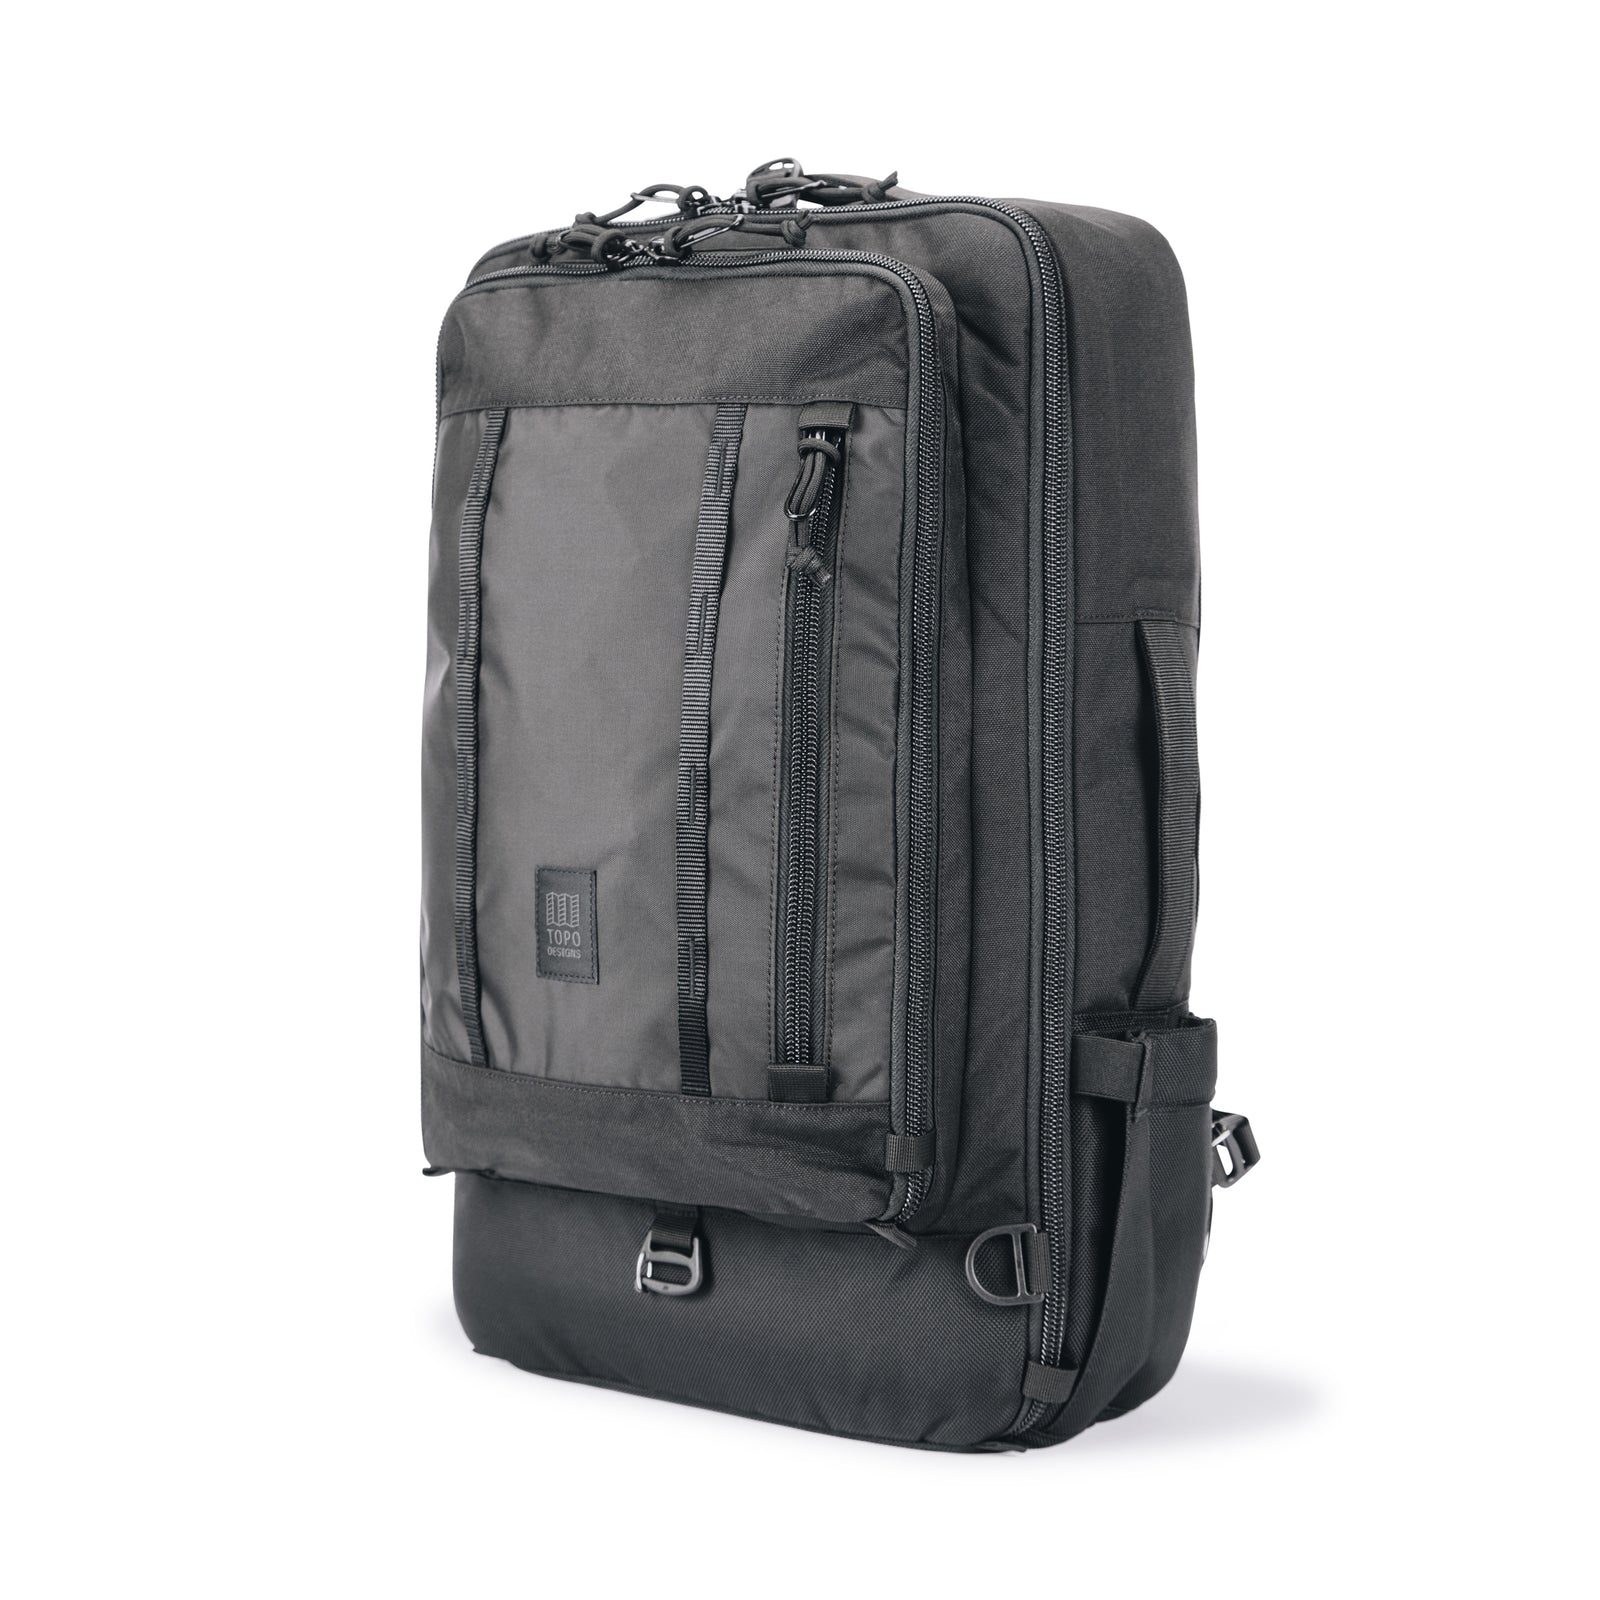 Topo Designs Global Travel Bag 40L Durable Carry On Convertible Laptop Travel Backpack in "Black".